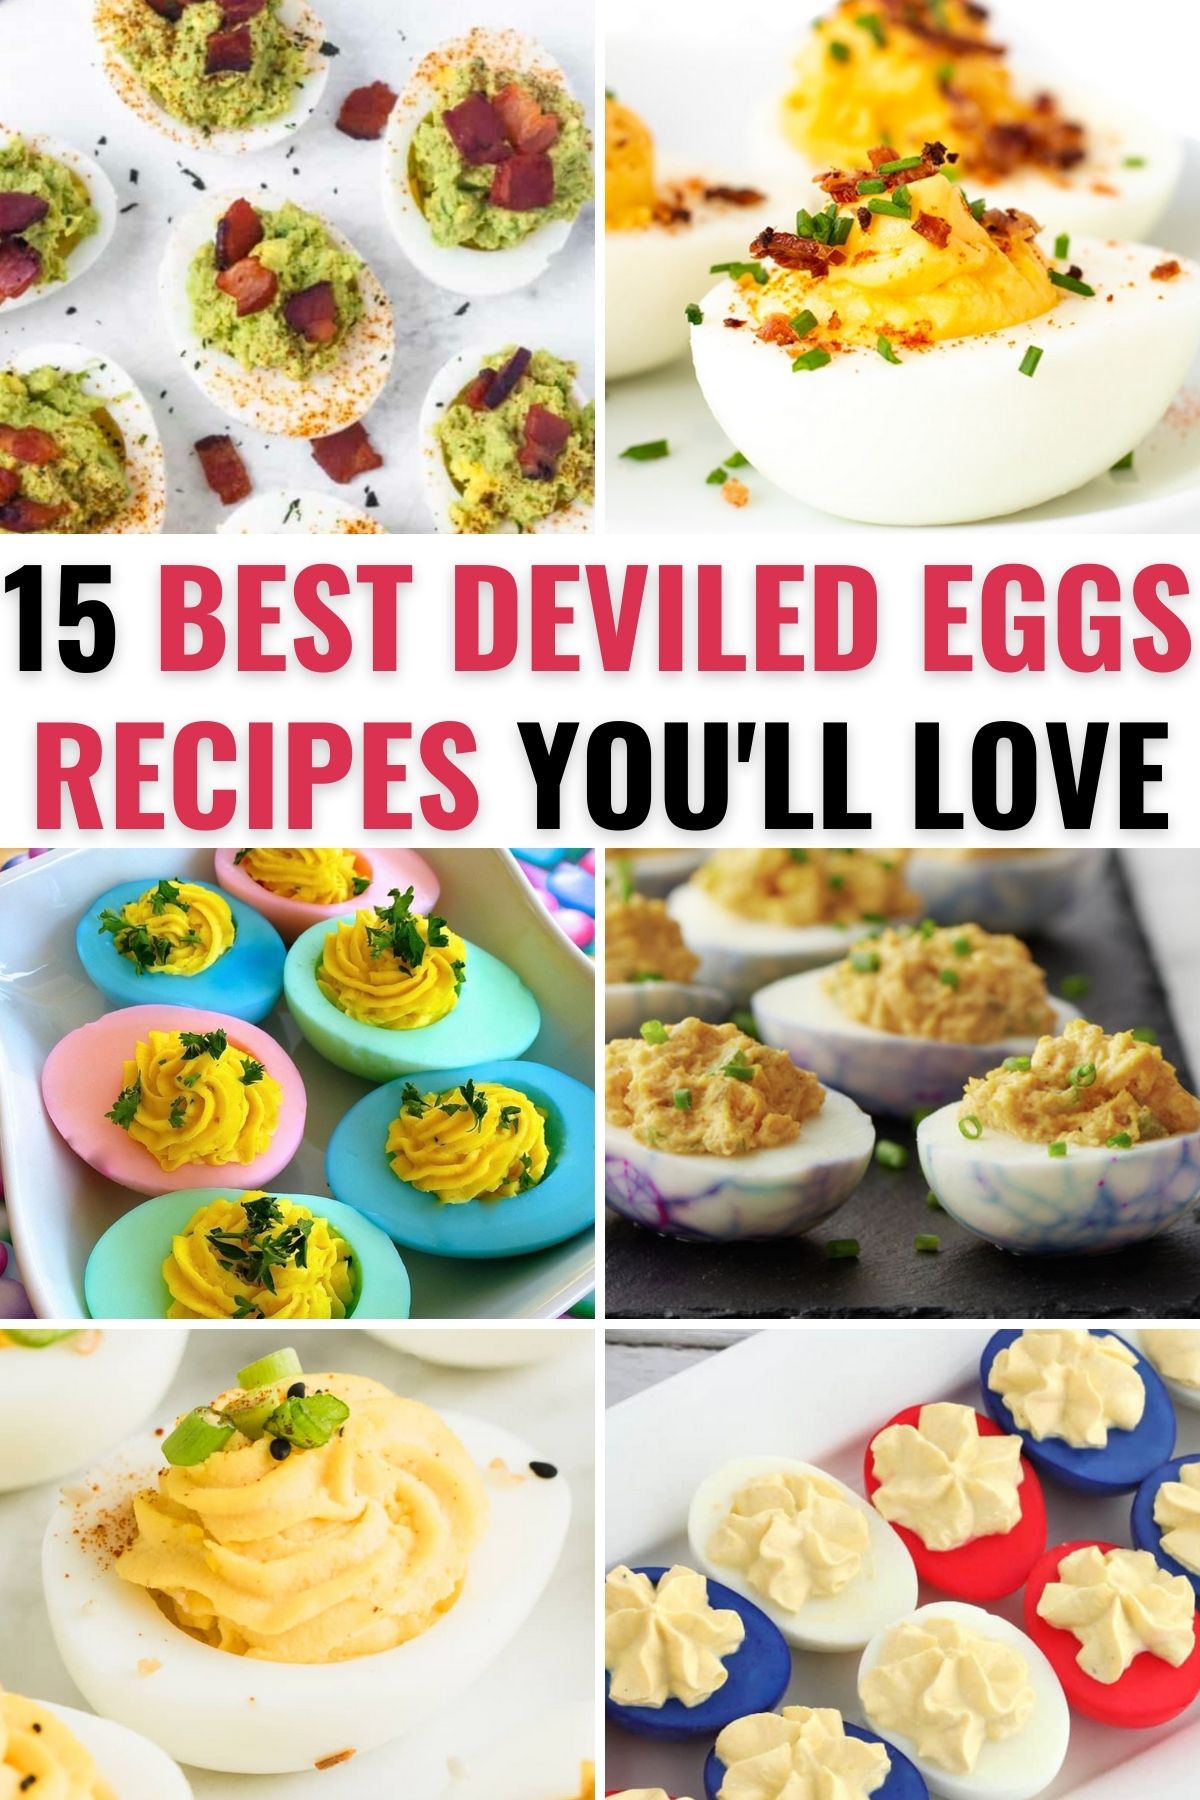 A collection of deviled eggs recipes.